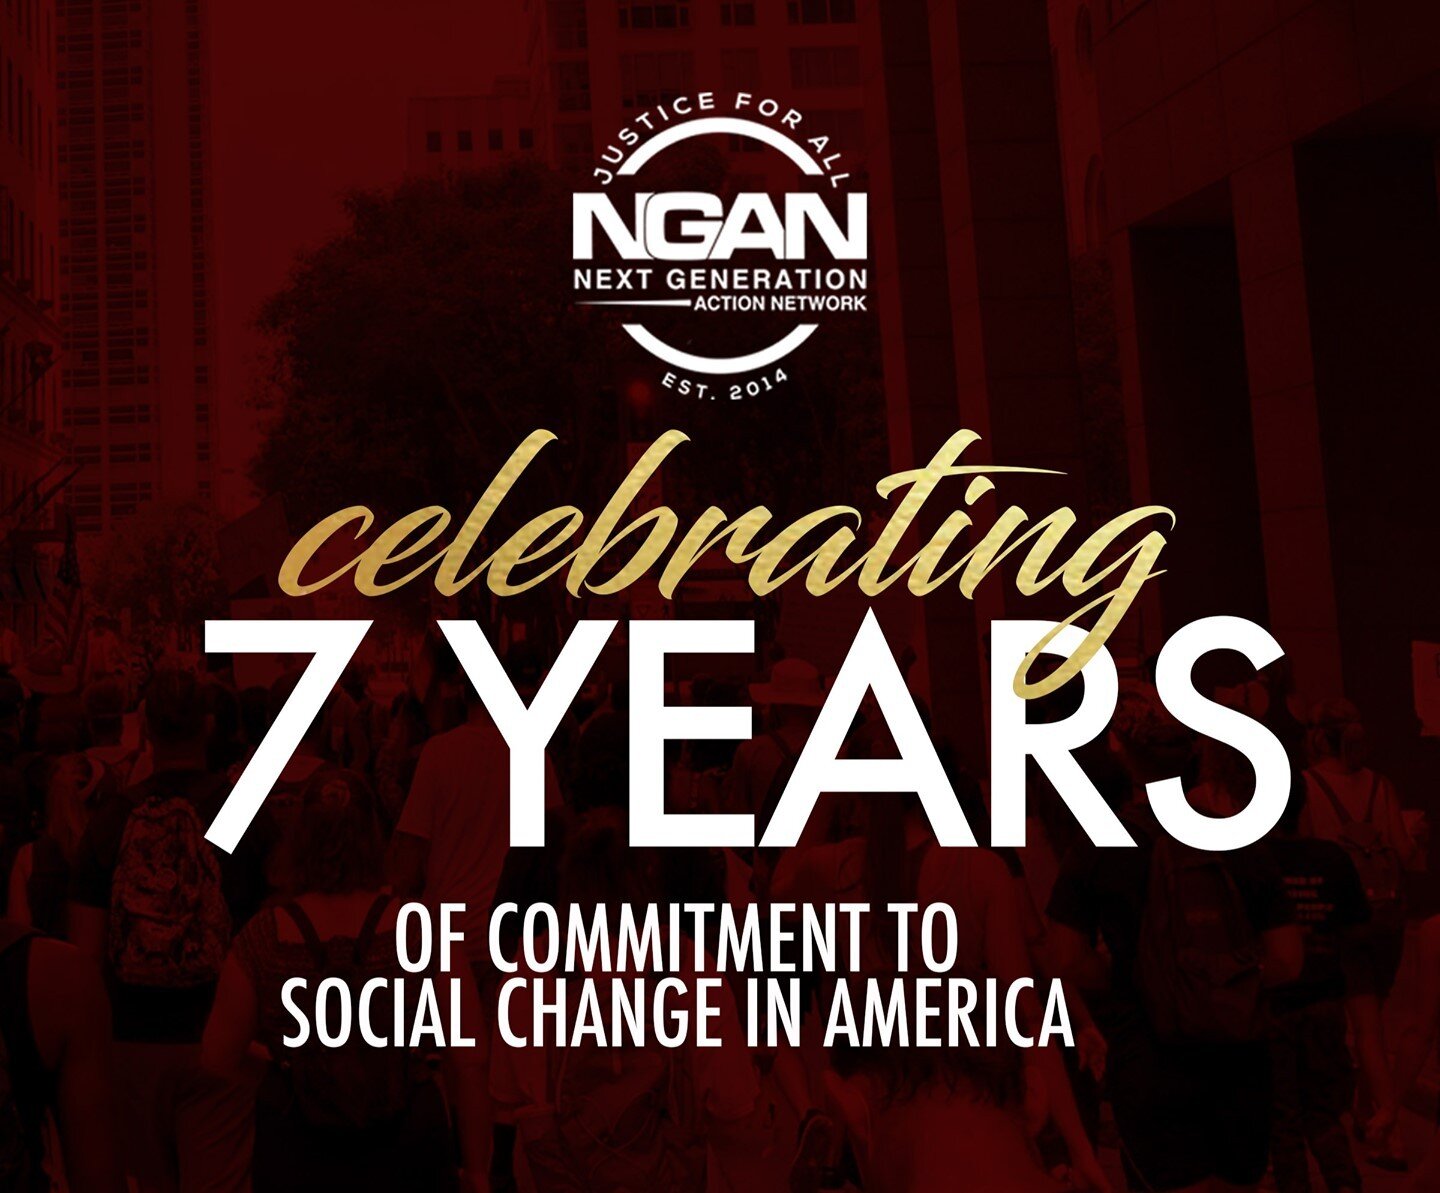 It&rsquo;s hard to believe that it has been 7 years since we launched the Next Generation Action Network.

Over the years, NGAN has organized for a plethora of causes and has taken great strides towards combatting oppression and discrimination for th